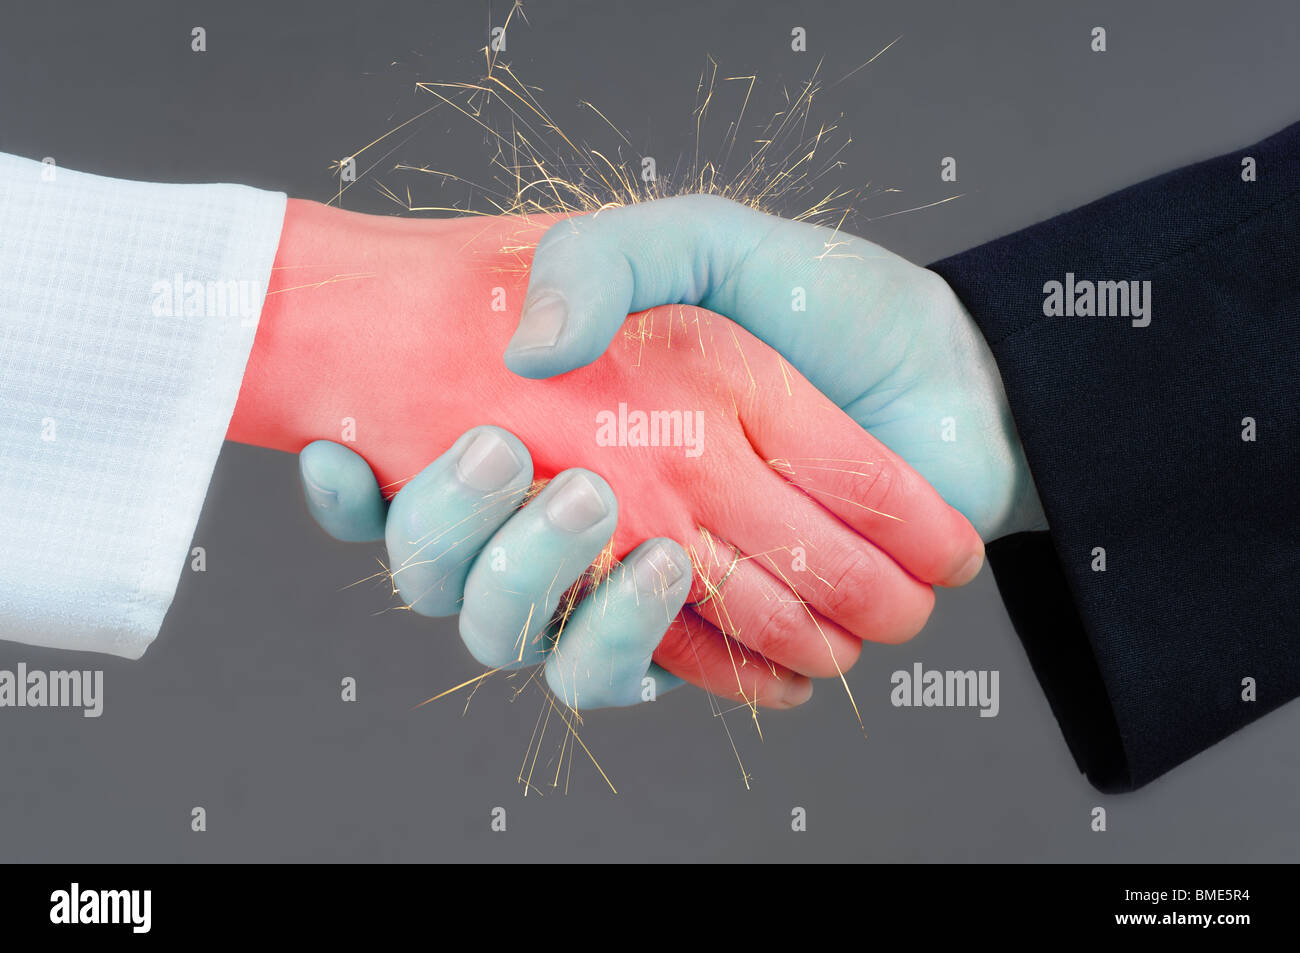 Handshake concept - clash of male and female hand. Stock Photo